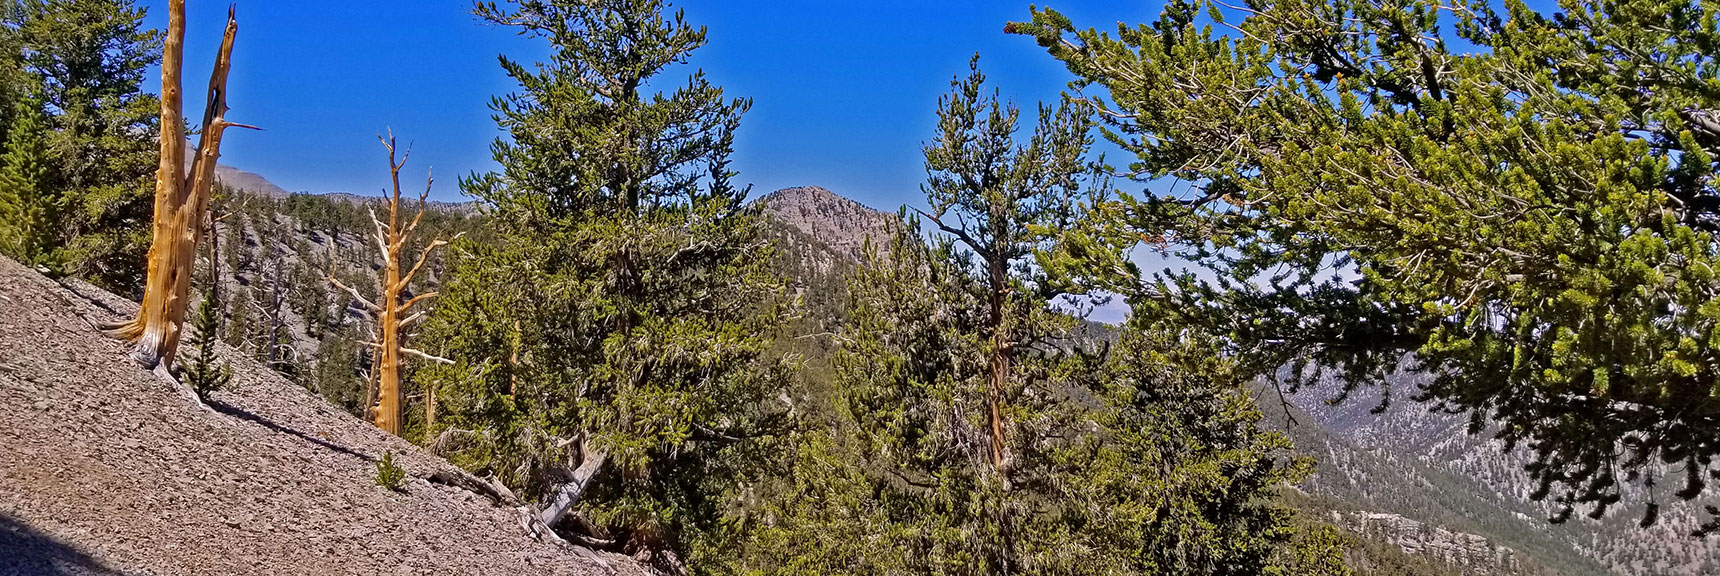 Lee Peak in View to Southwest | Lee to Kyle Canyon | Foxtail Approach | Mt Charleston Wilderness | Spring Mountains, Nevada